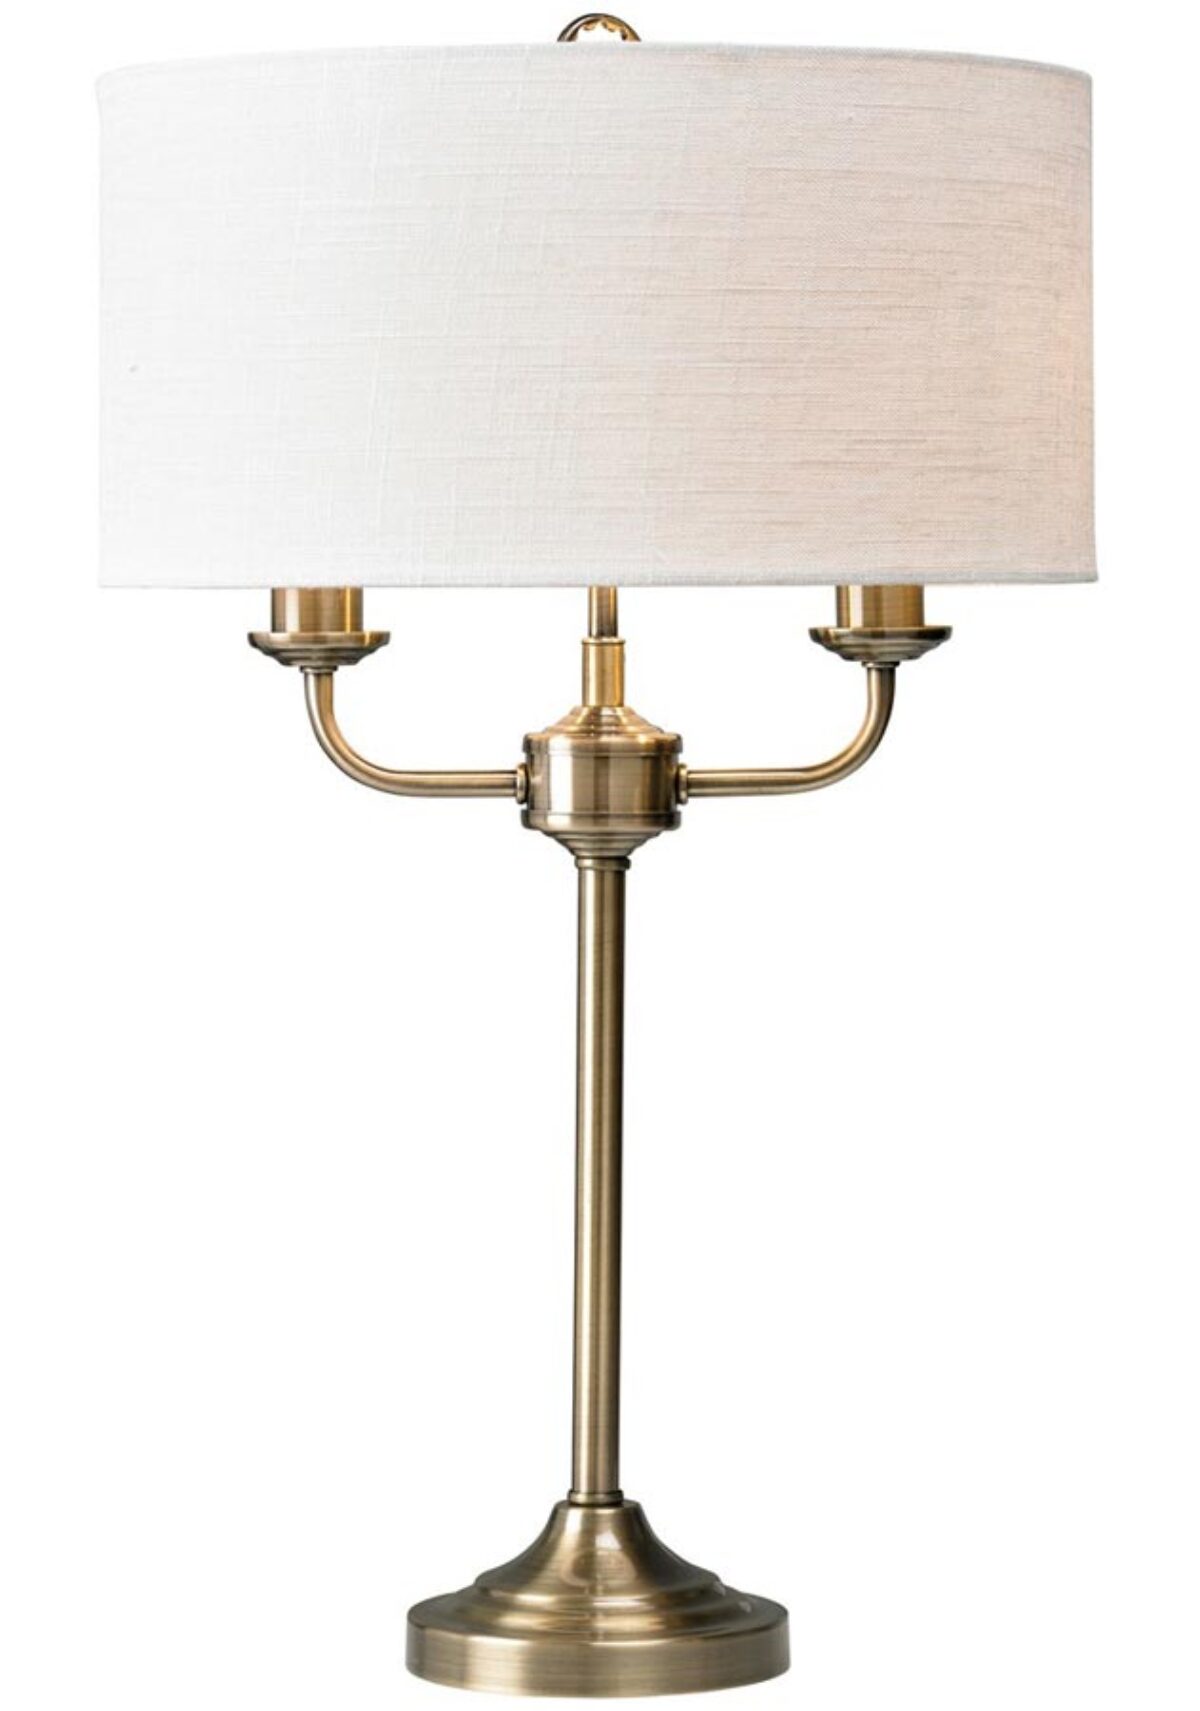 Grantham 2 Arm Candelabra Table Lamp, Brass Table Lamp With Shade